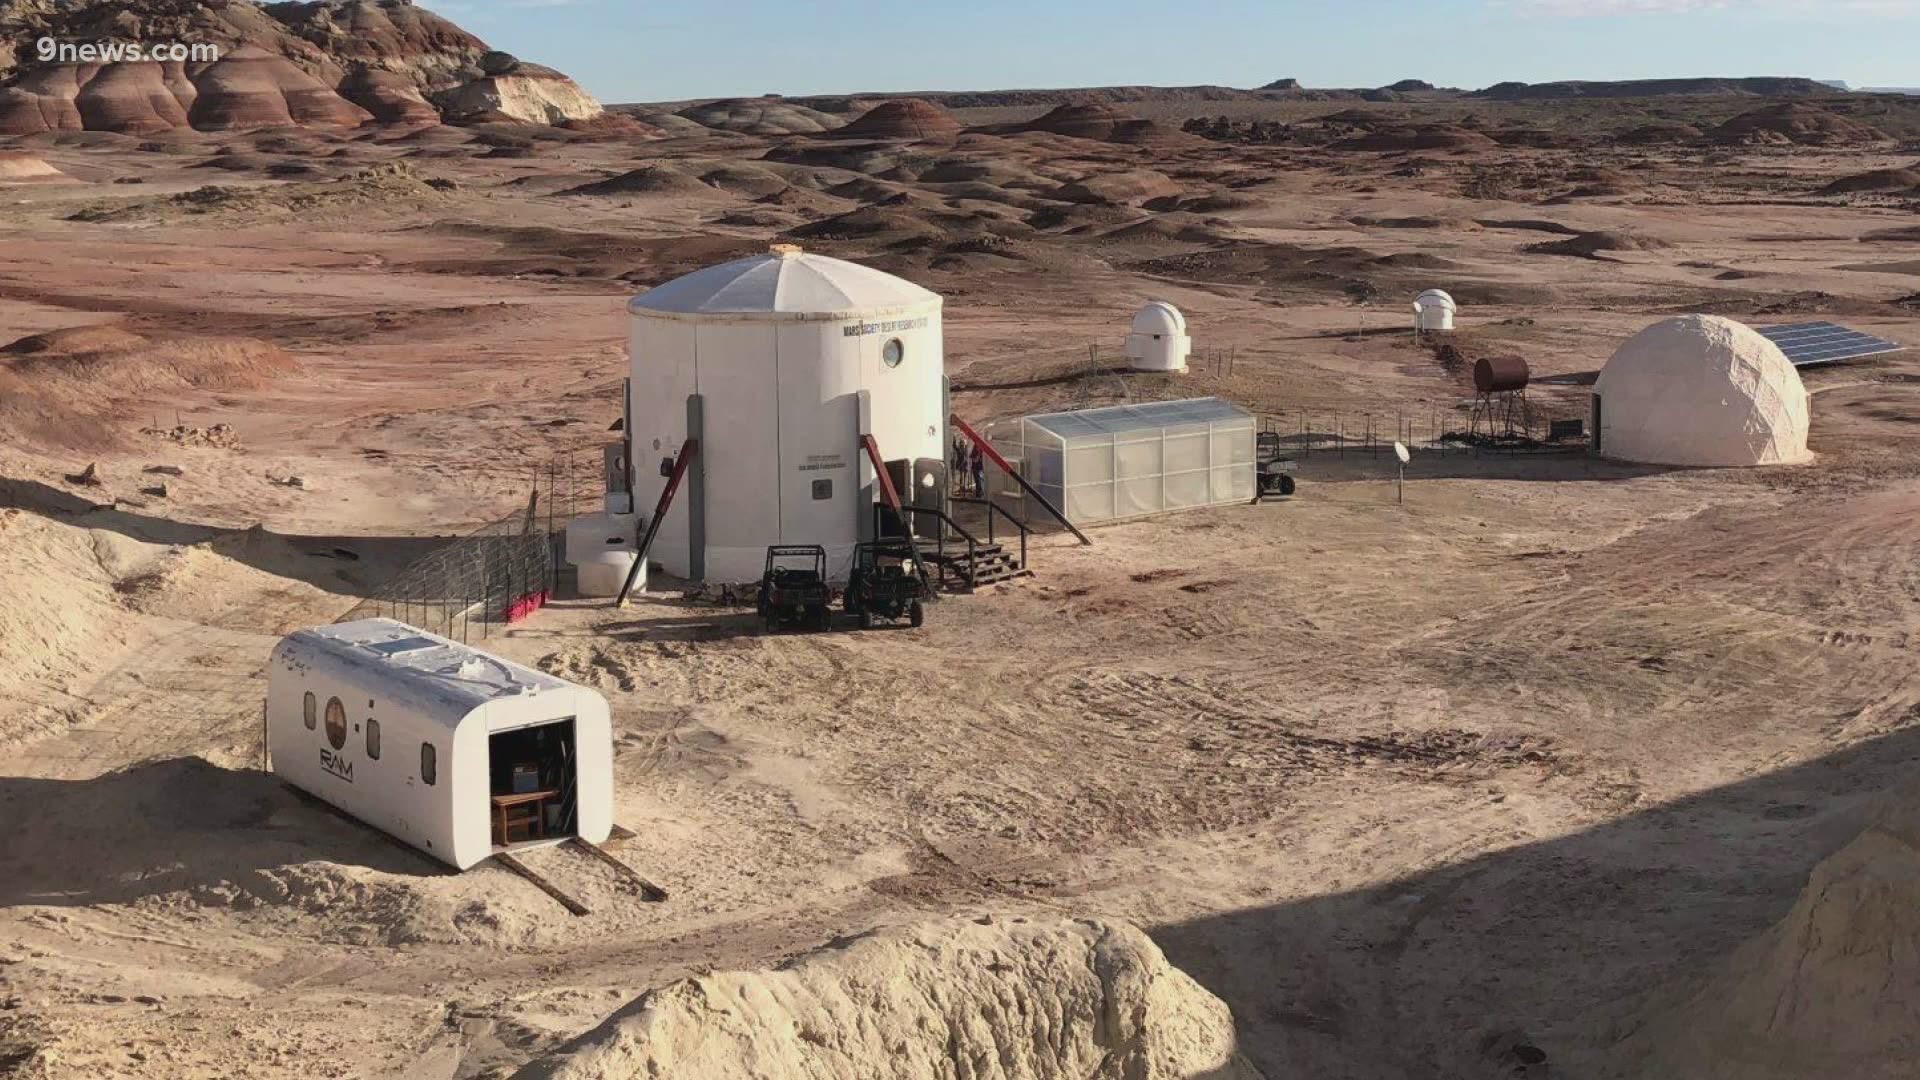 A CU Boulder grad student will be spending the next 2 weeks at a Mars outpost. It’s not on the red planet though – it’s in Hanksville, Utah.